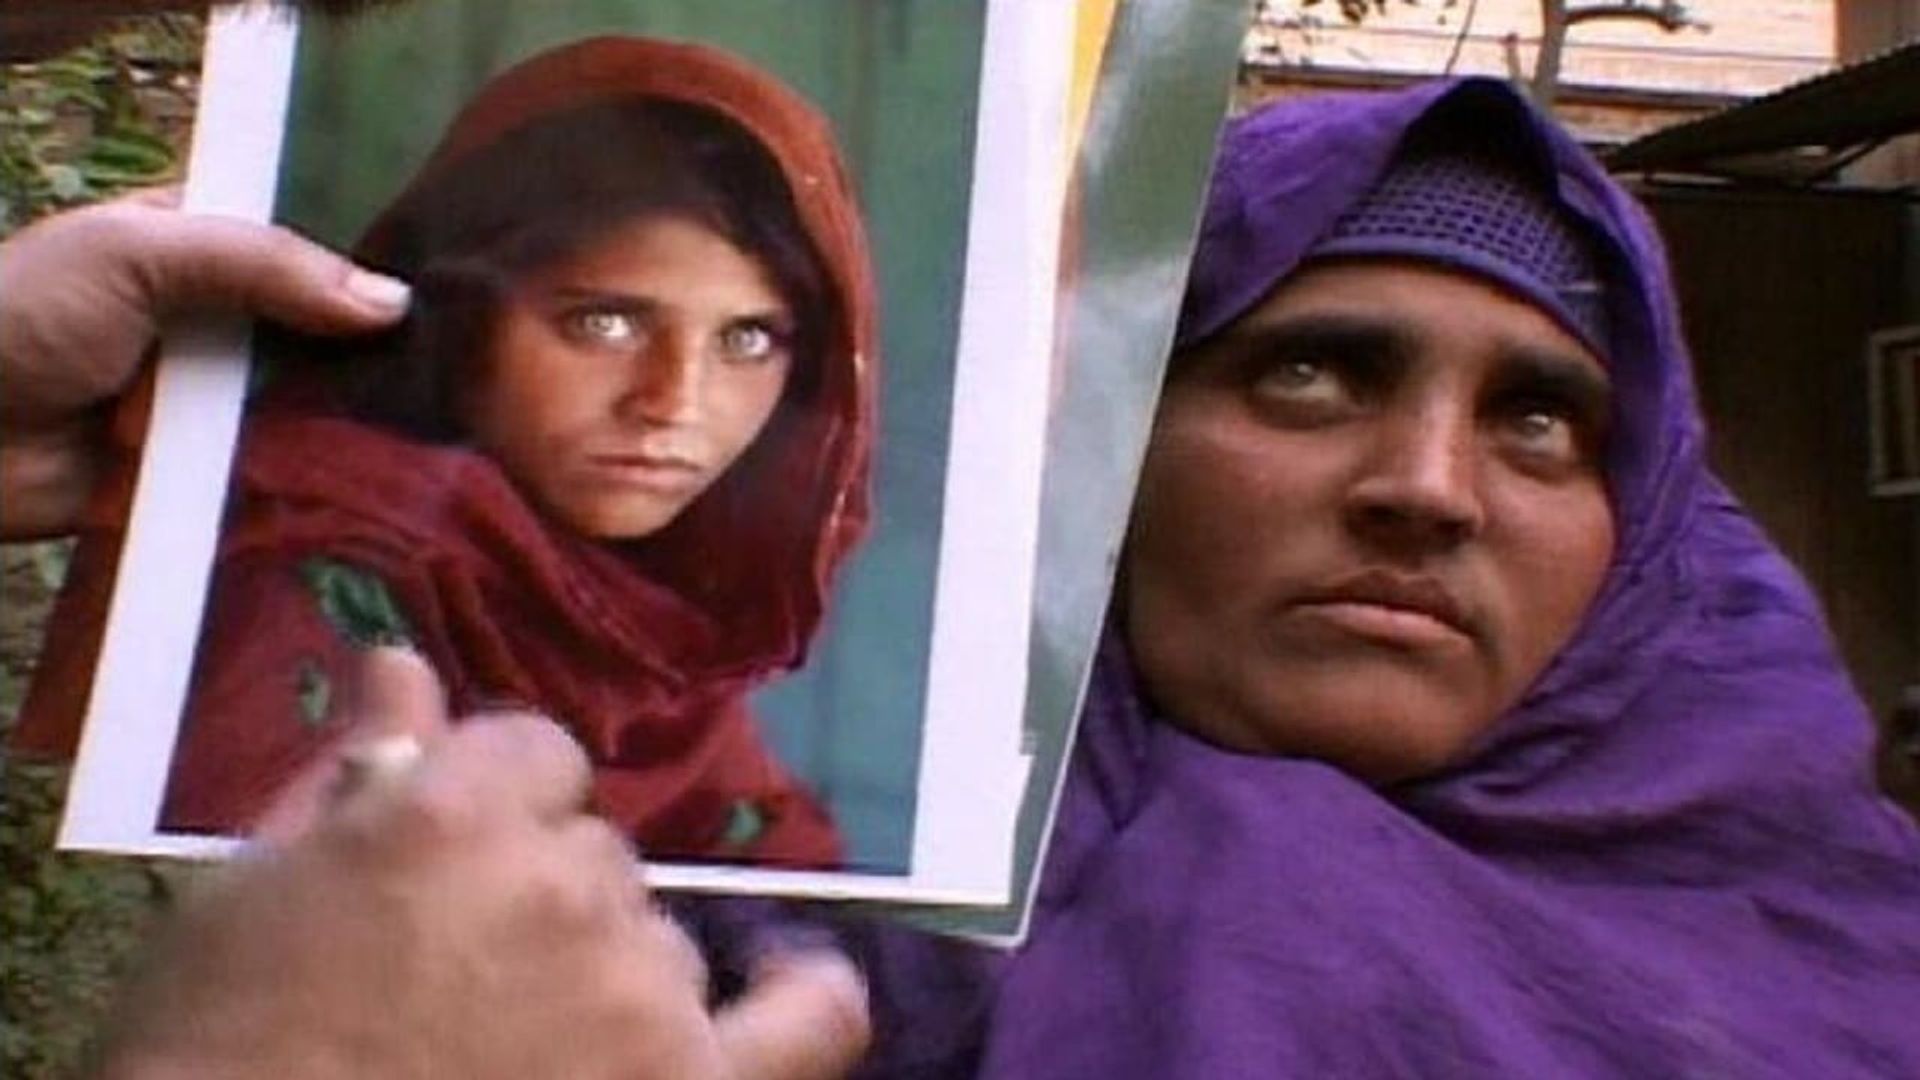 Search for the Afghan Girl background